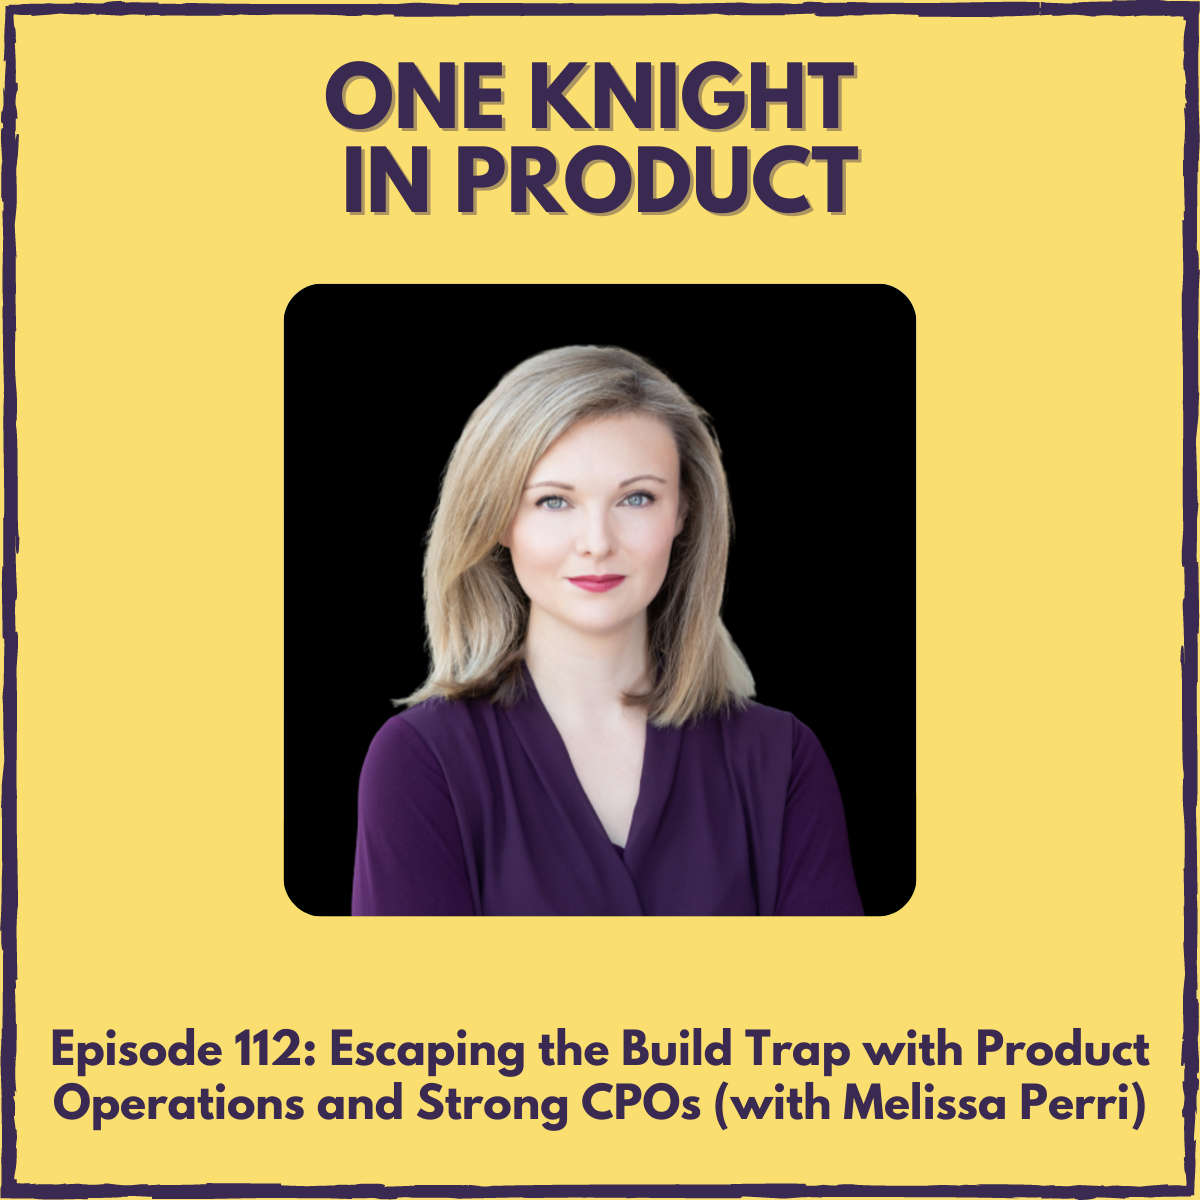 Escaping the Build Trap with Product Operations and Strong CPOs (with Melissa Perri, author ”Escaping the Build Trap”)